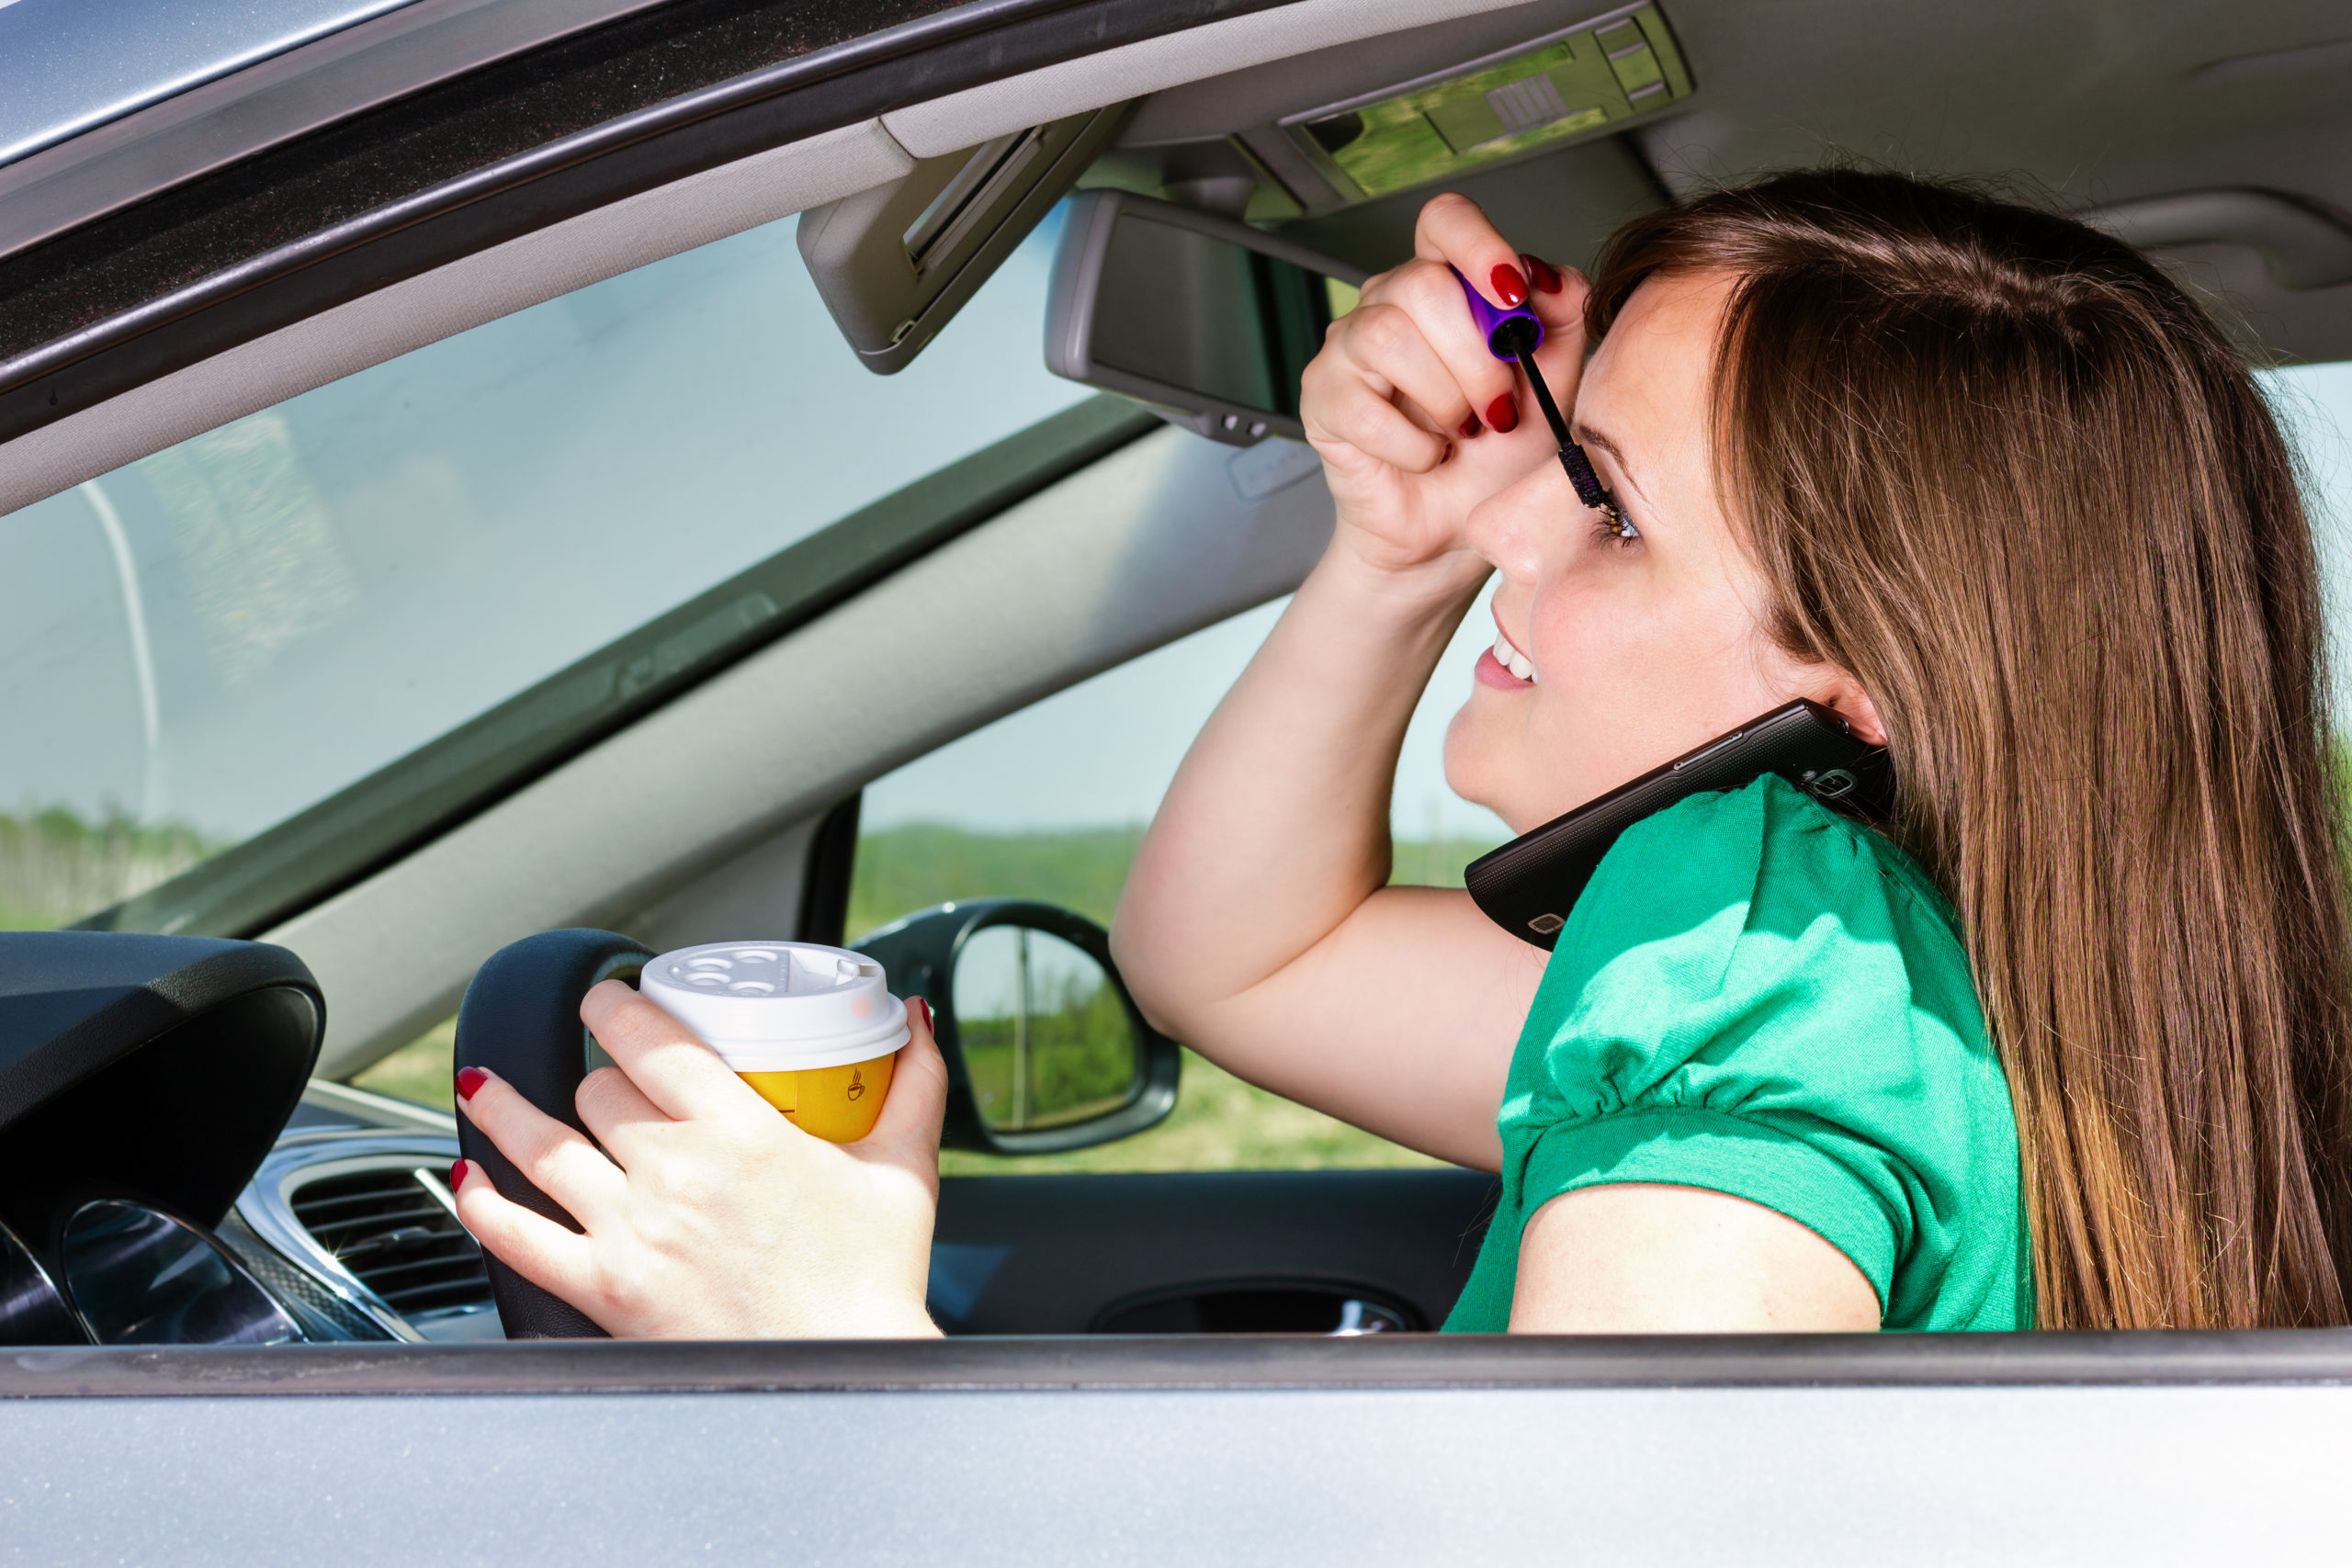 Cell phones, eating, and grooming, are among common distracted driving activities that can lead to car accidents.